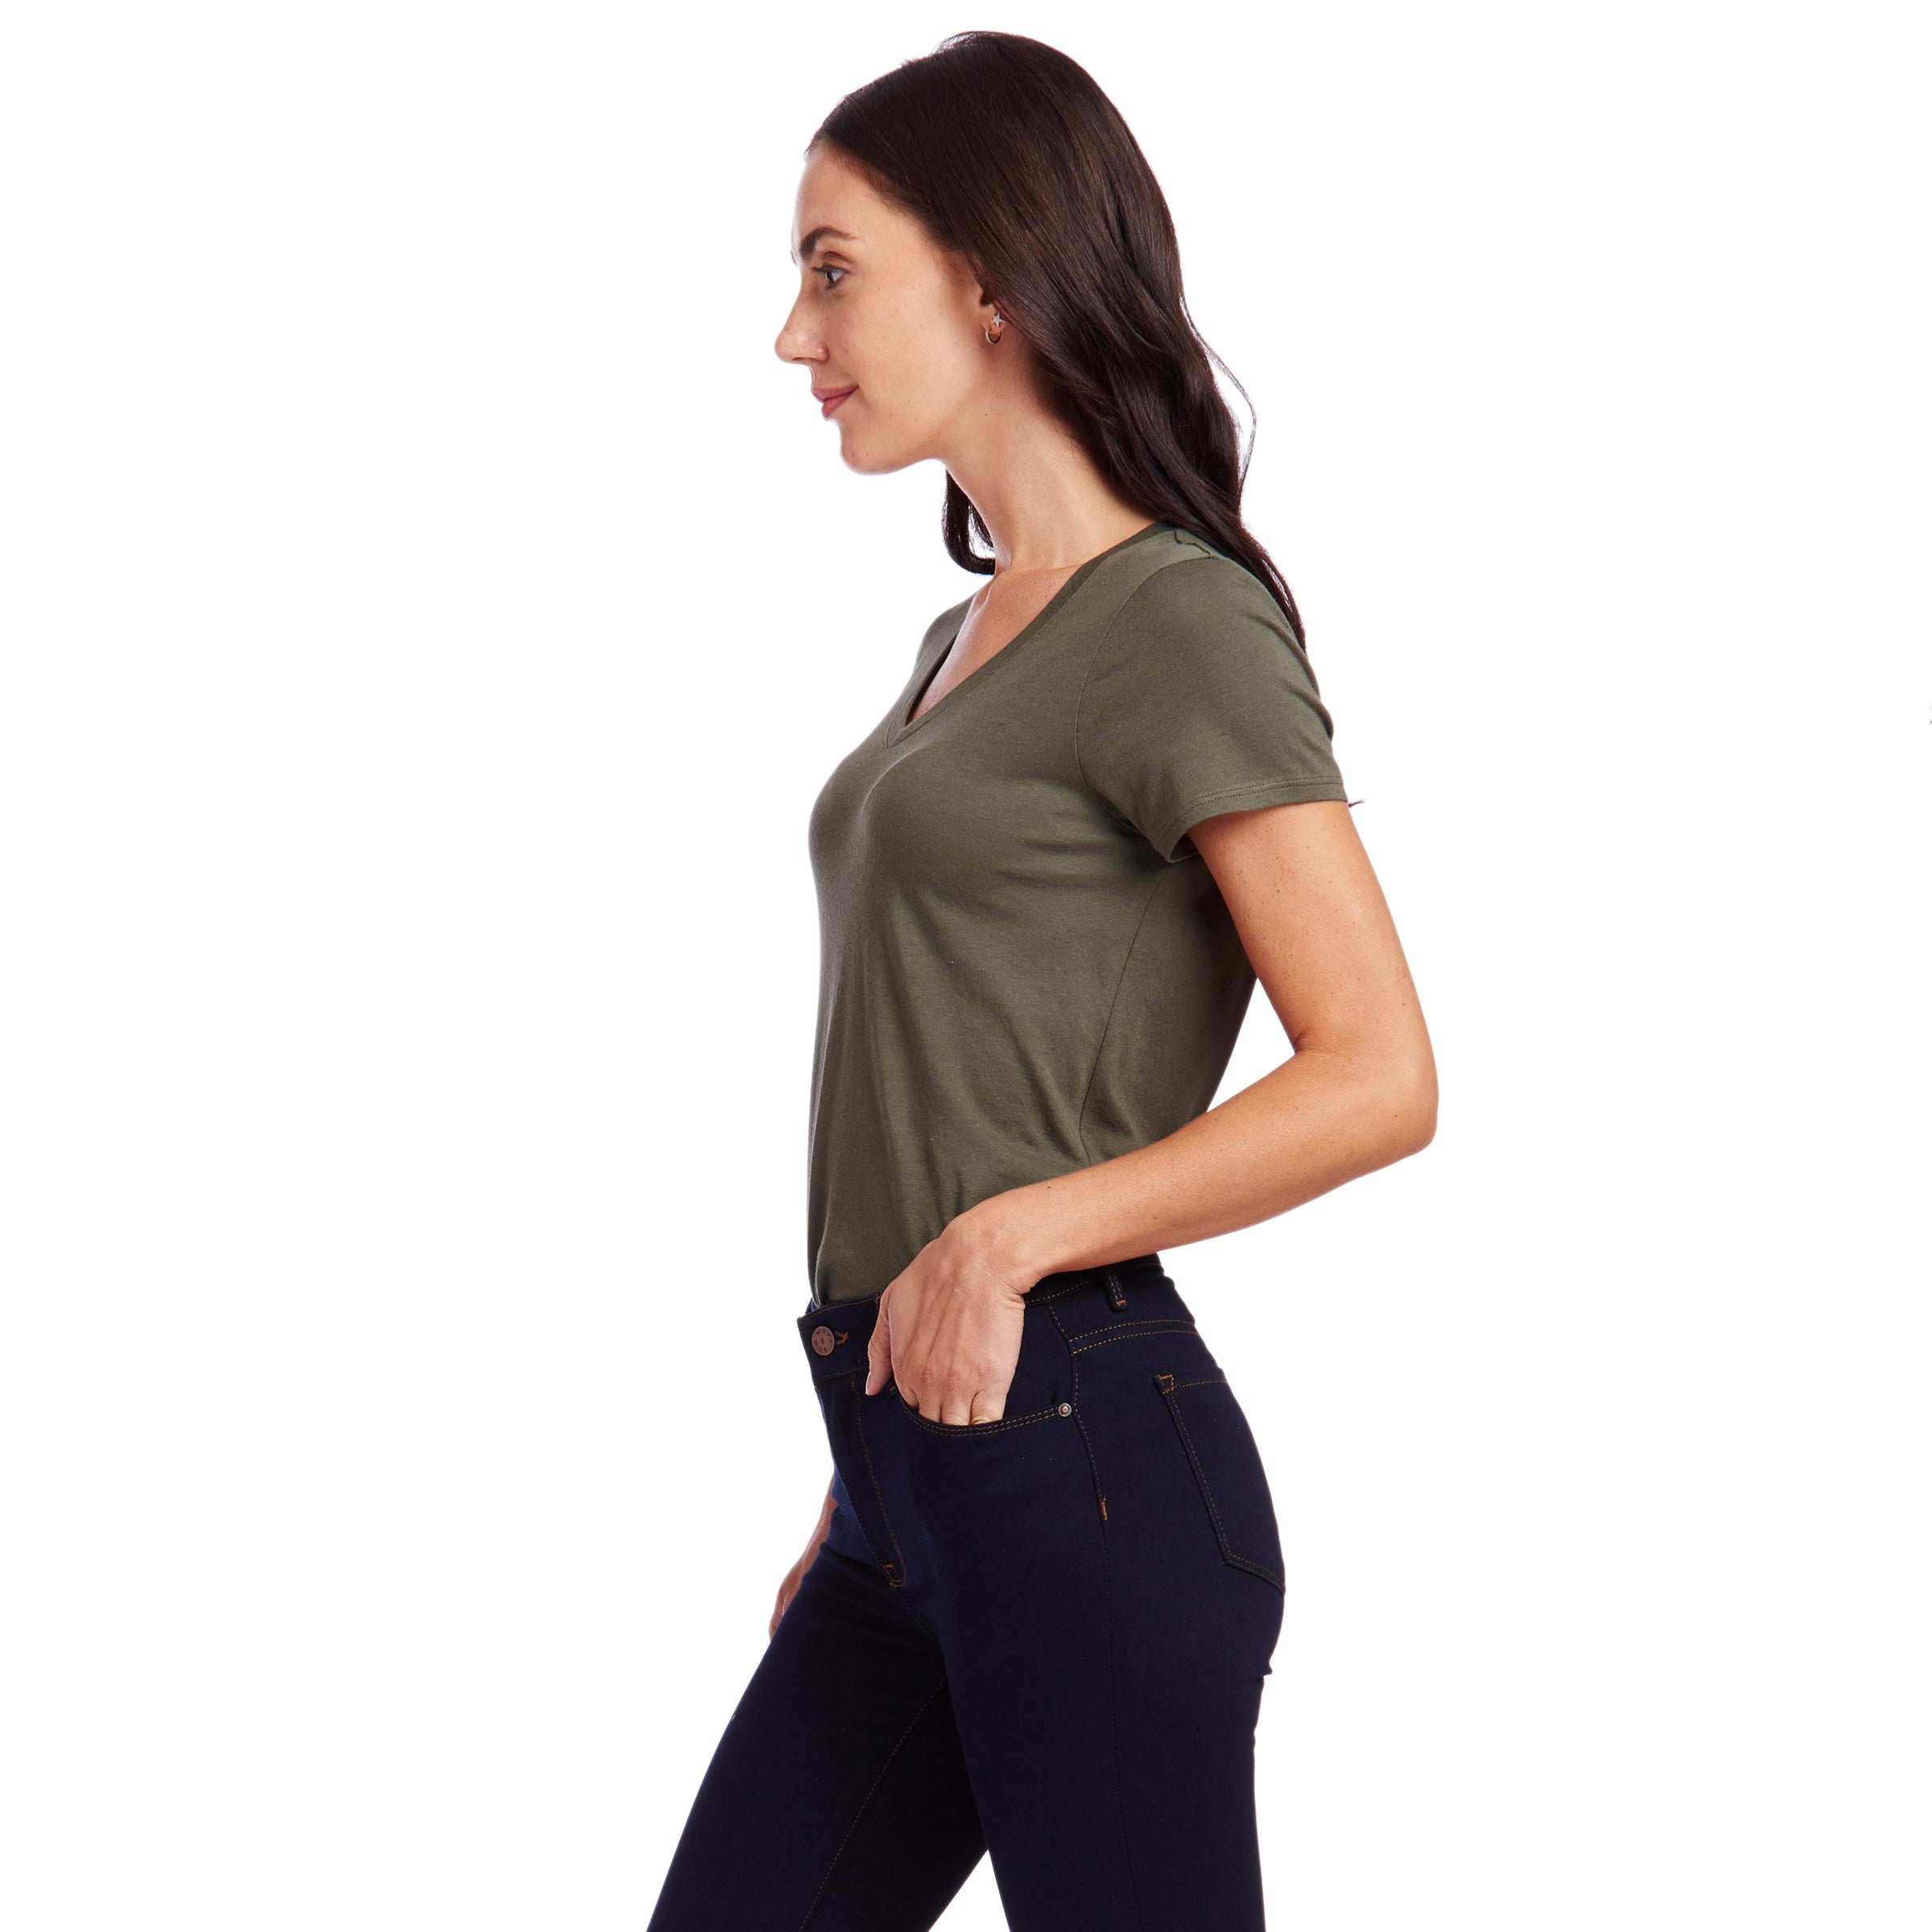 Women wearing Vert Militaire Fitted V-Neck Marcy Tee